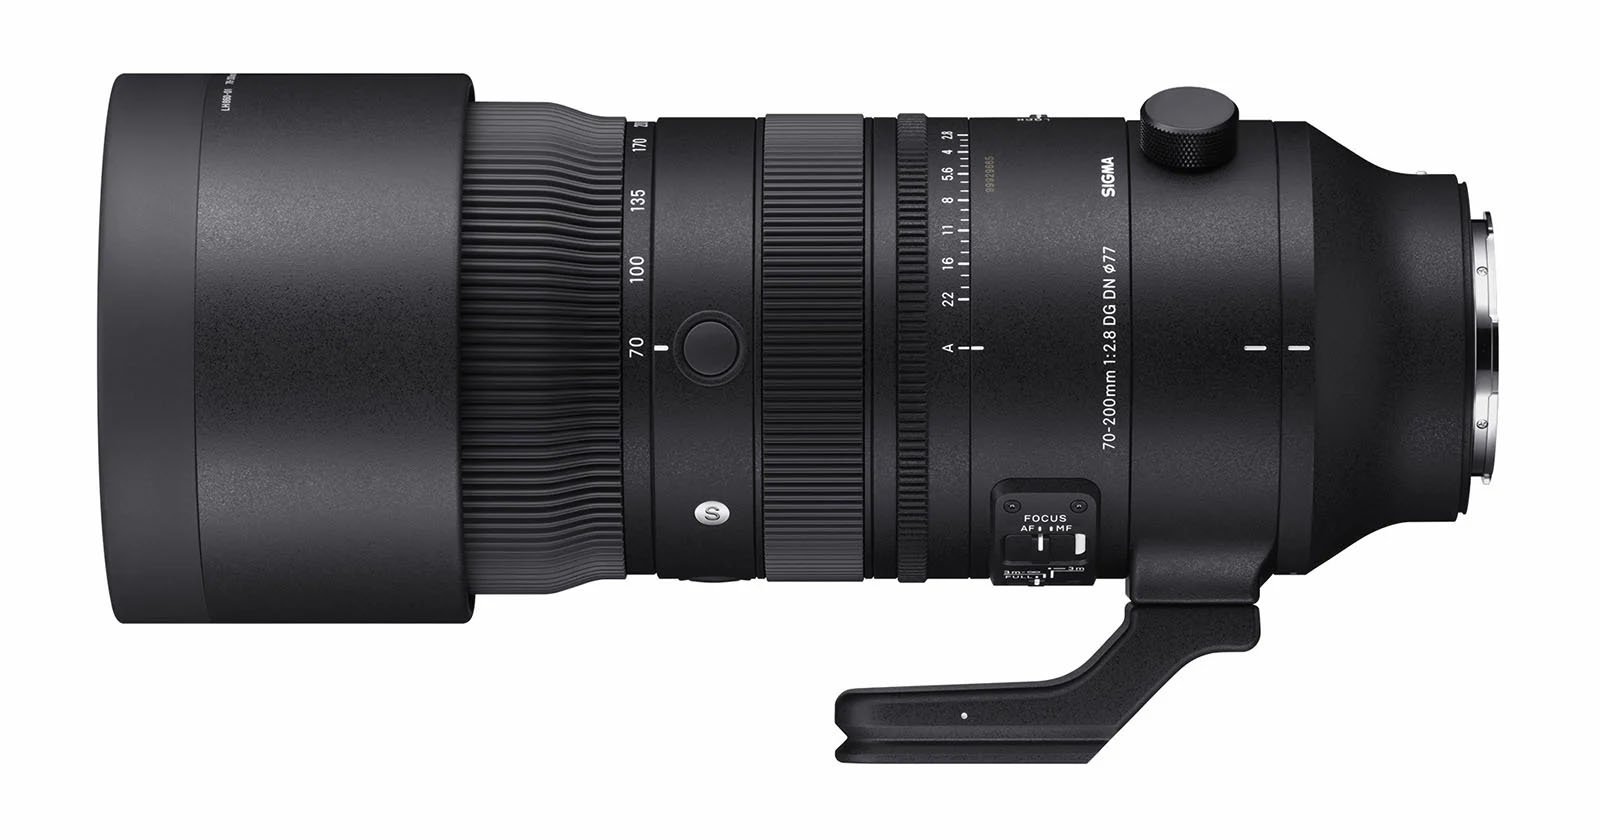  info about sigma upcoming 70-200mm mirrorless lens 